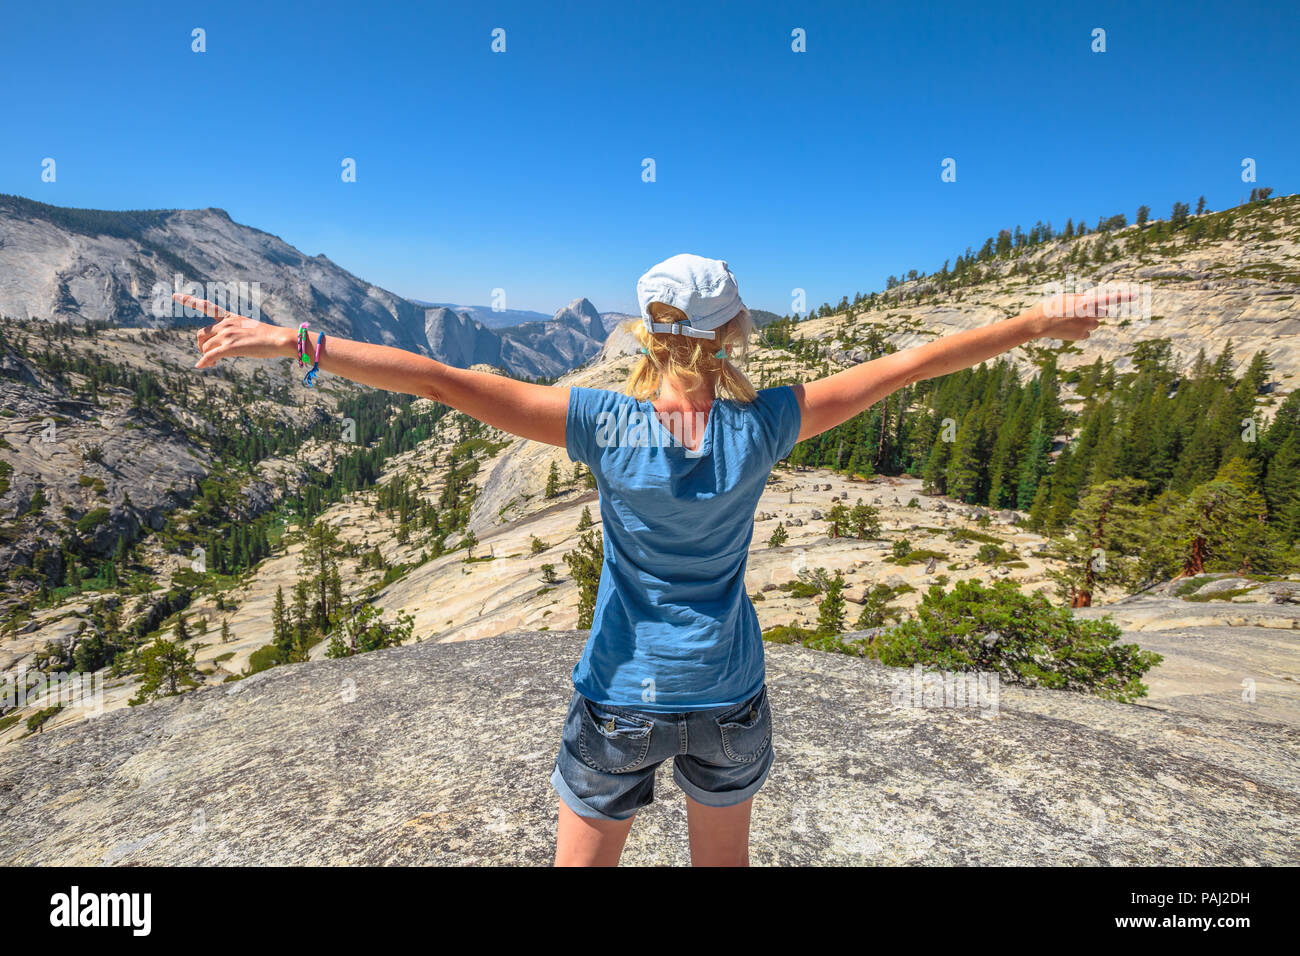 Hiking woman enthusiastic with open arms at Olmsted Point. Tired hiker resting happy and taking a breath after hiking. Caucasian female in Yosemite National Park, California, United States. Stock Photo